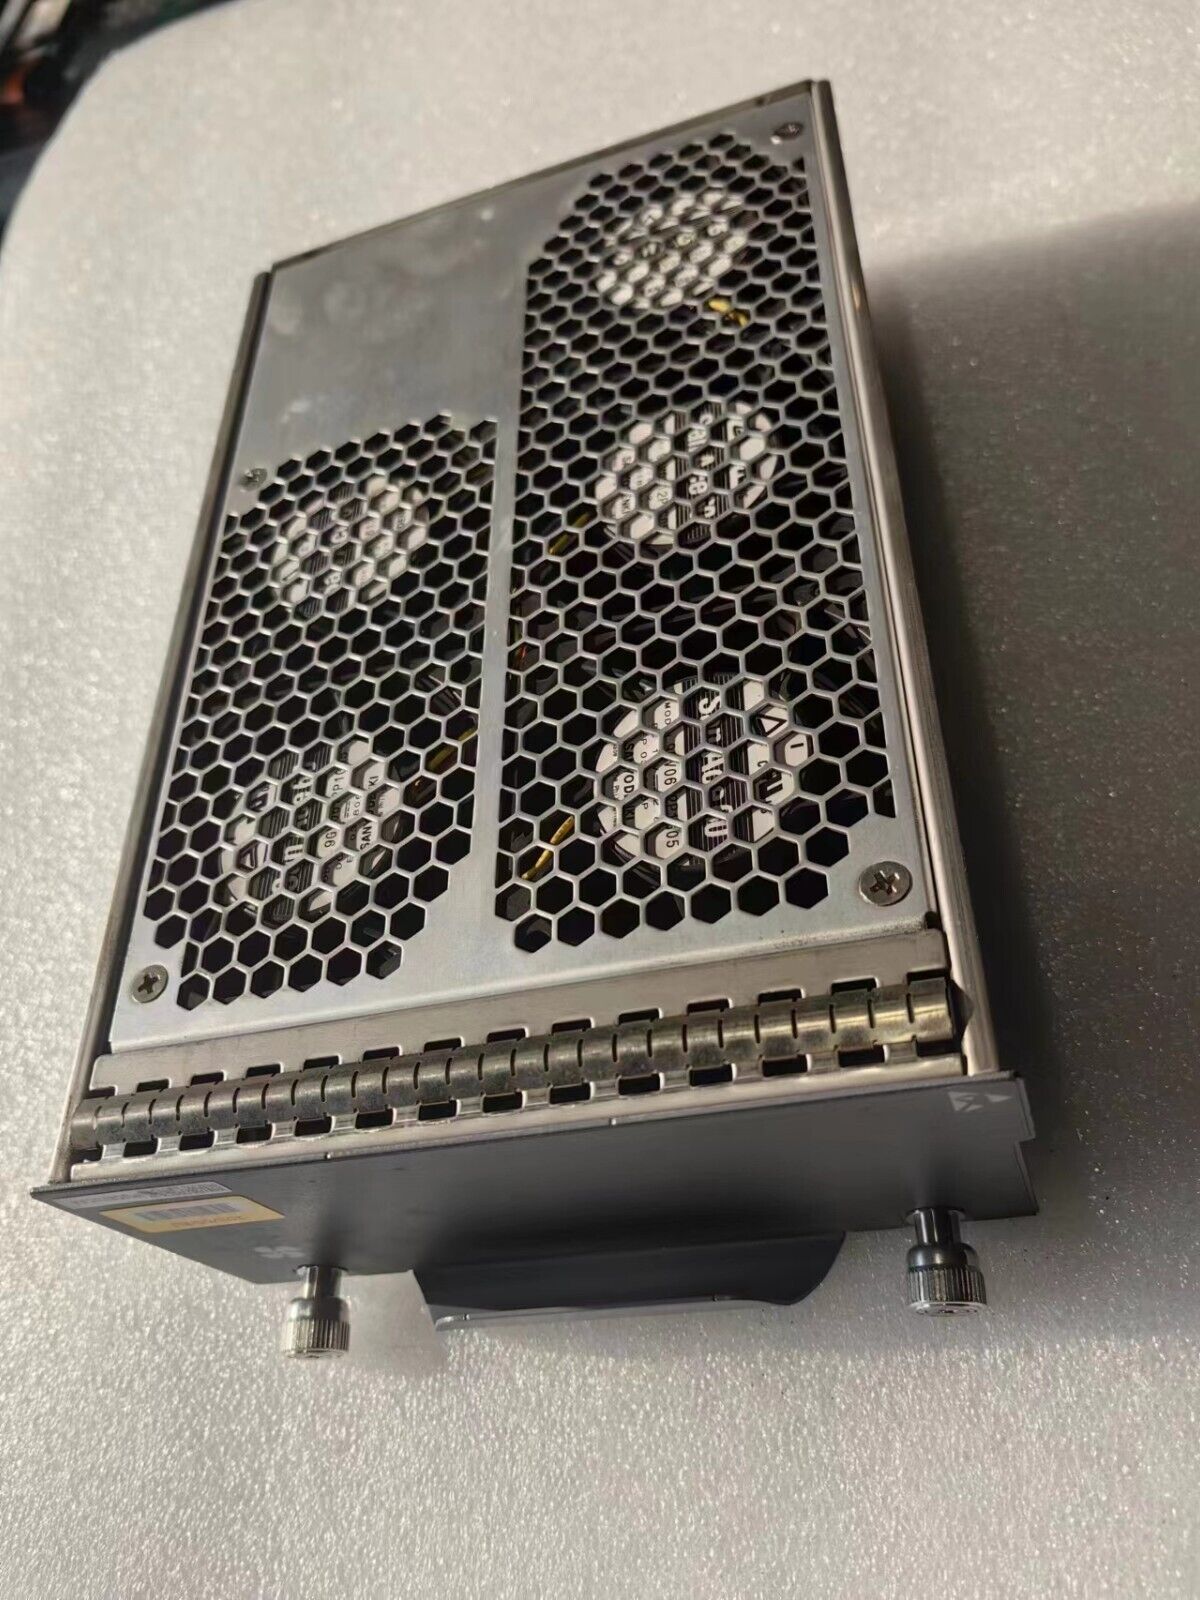 Used Working Juniper FANTRAY-MX104-S Fan Tray Cooling Module for MX104 chassis